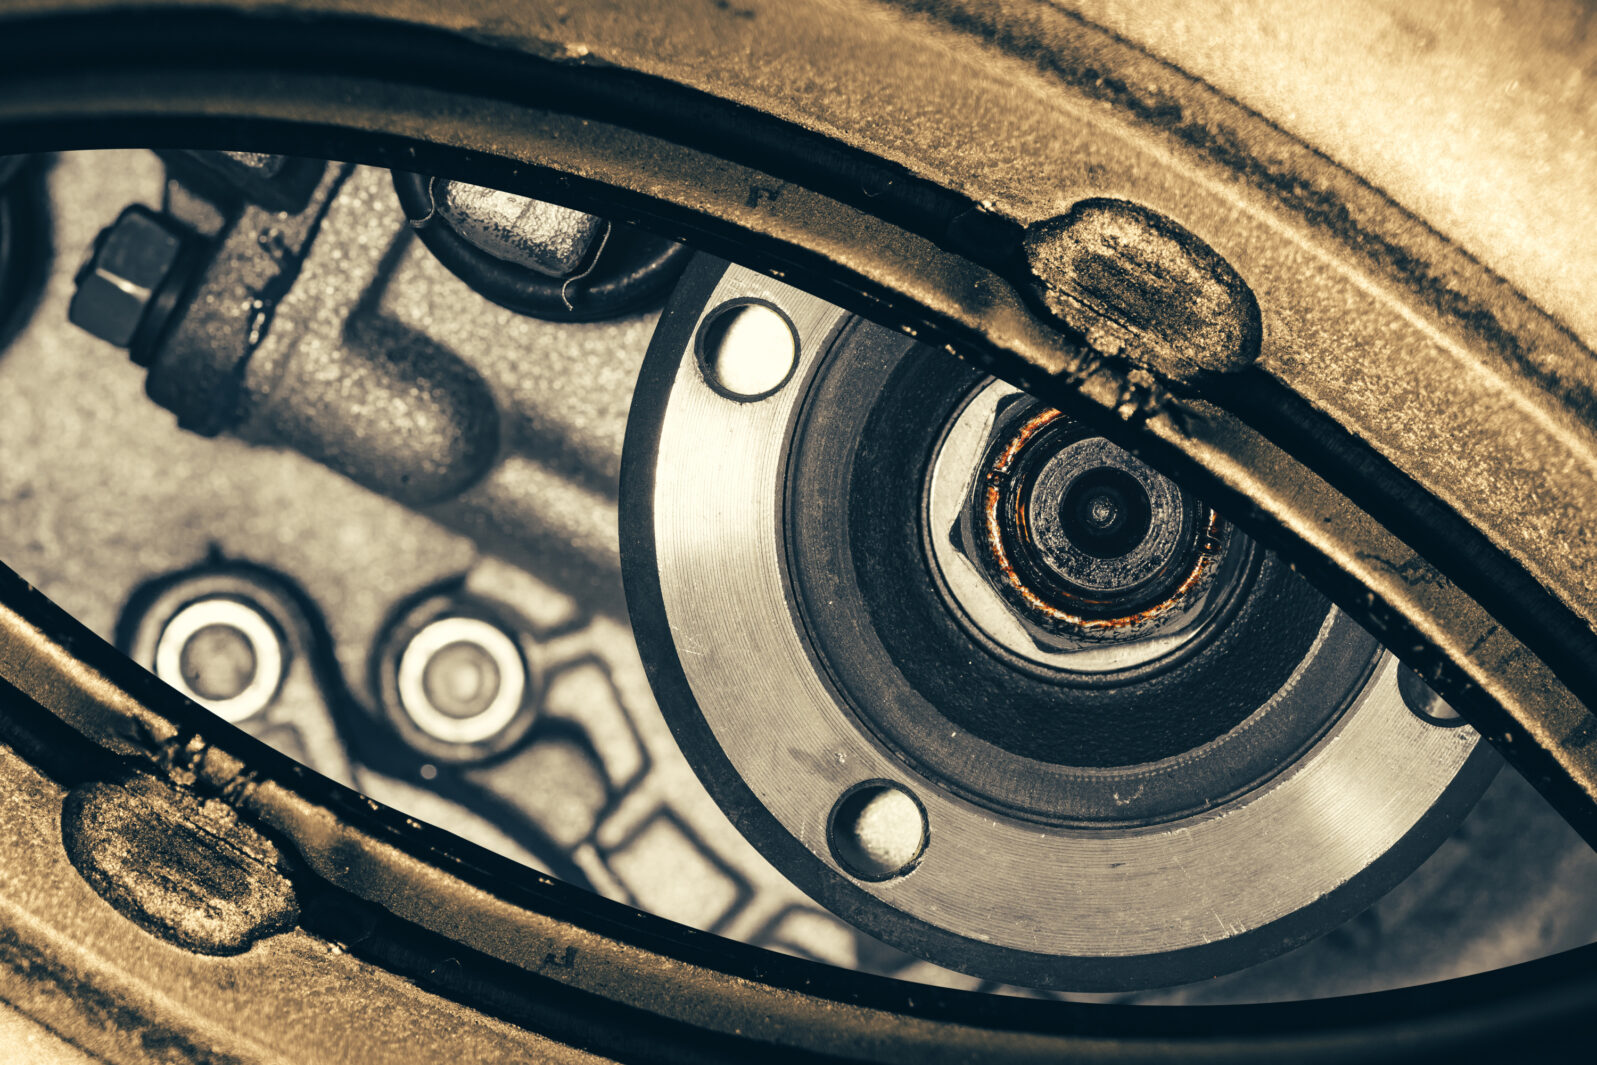 Unusual robotic eye in steampunk style. Focused robot look. Background pattern close-up.